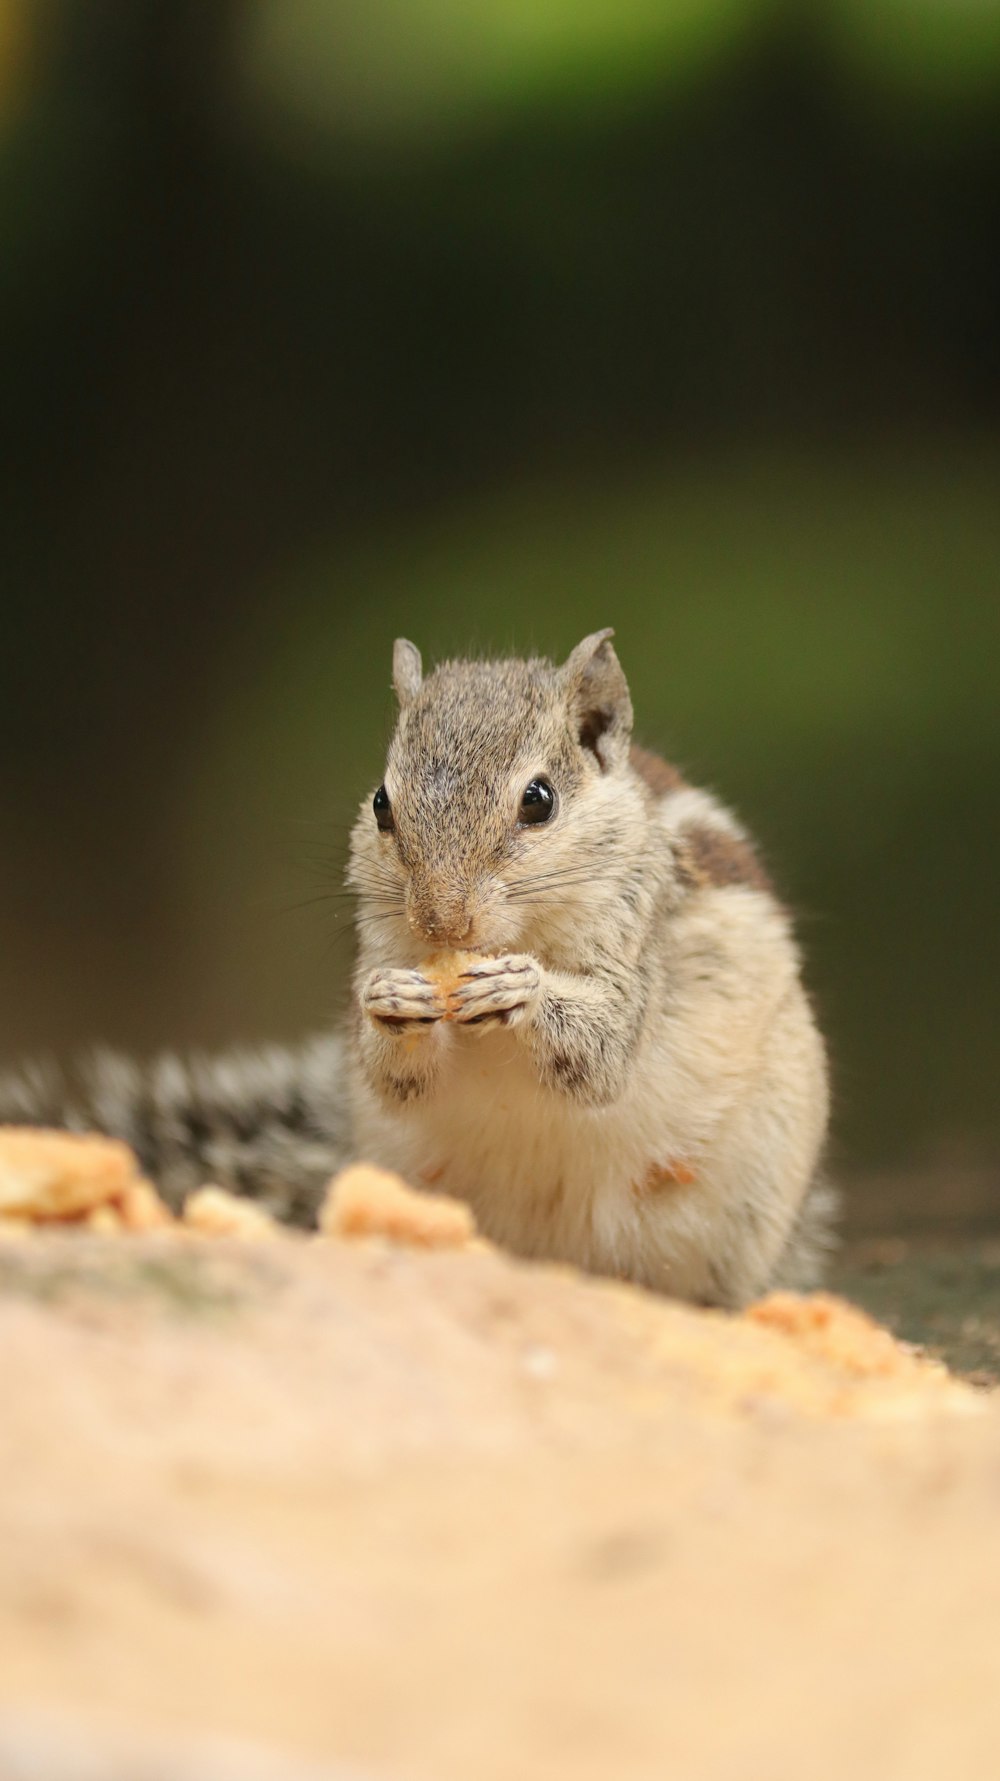 a small rodent sitting on the ground eating food